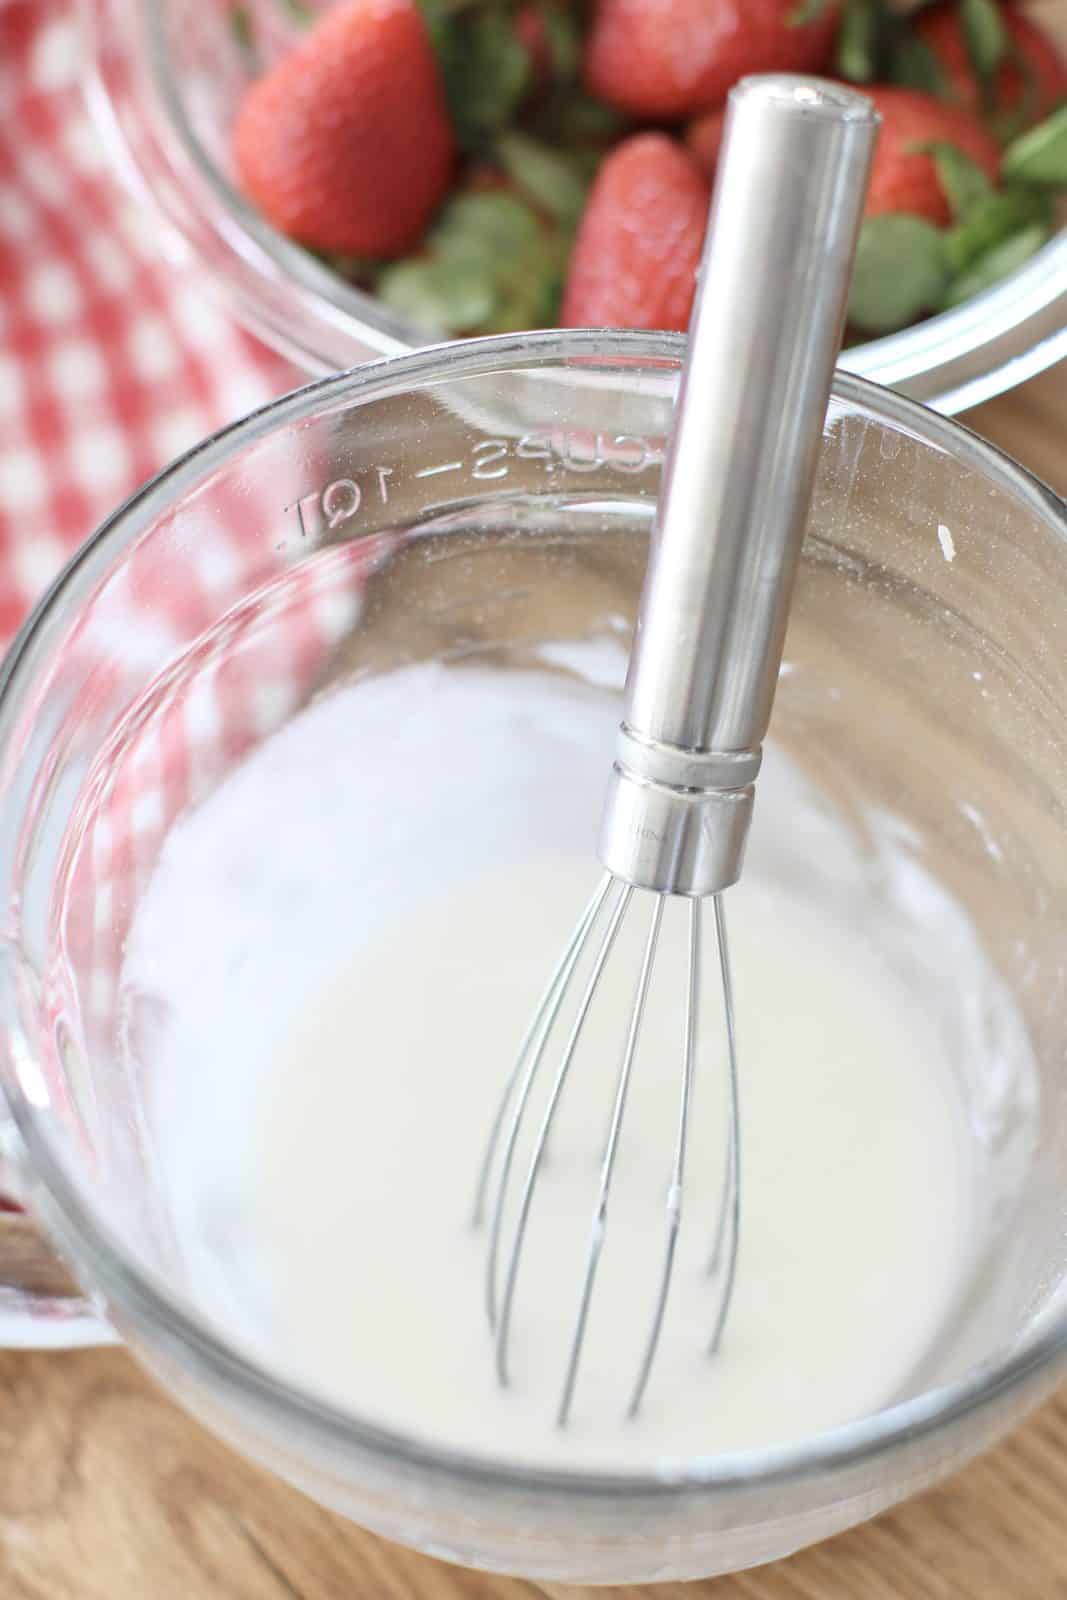 powdered sugar and milk whisked together in a small measuring bowl.